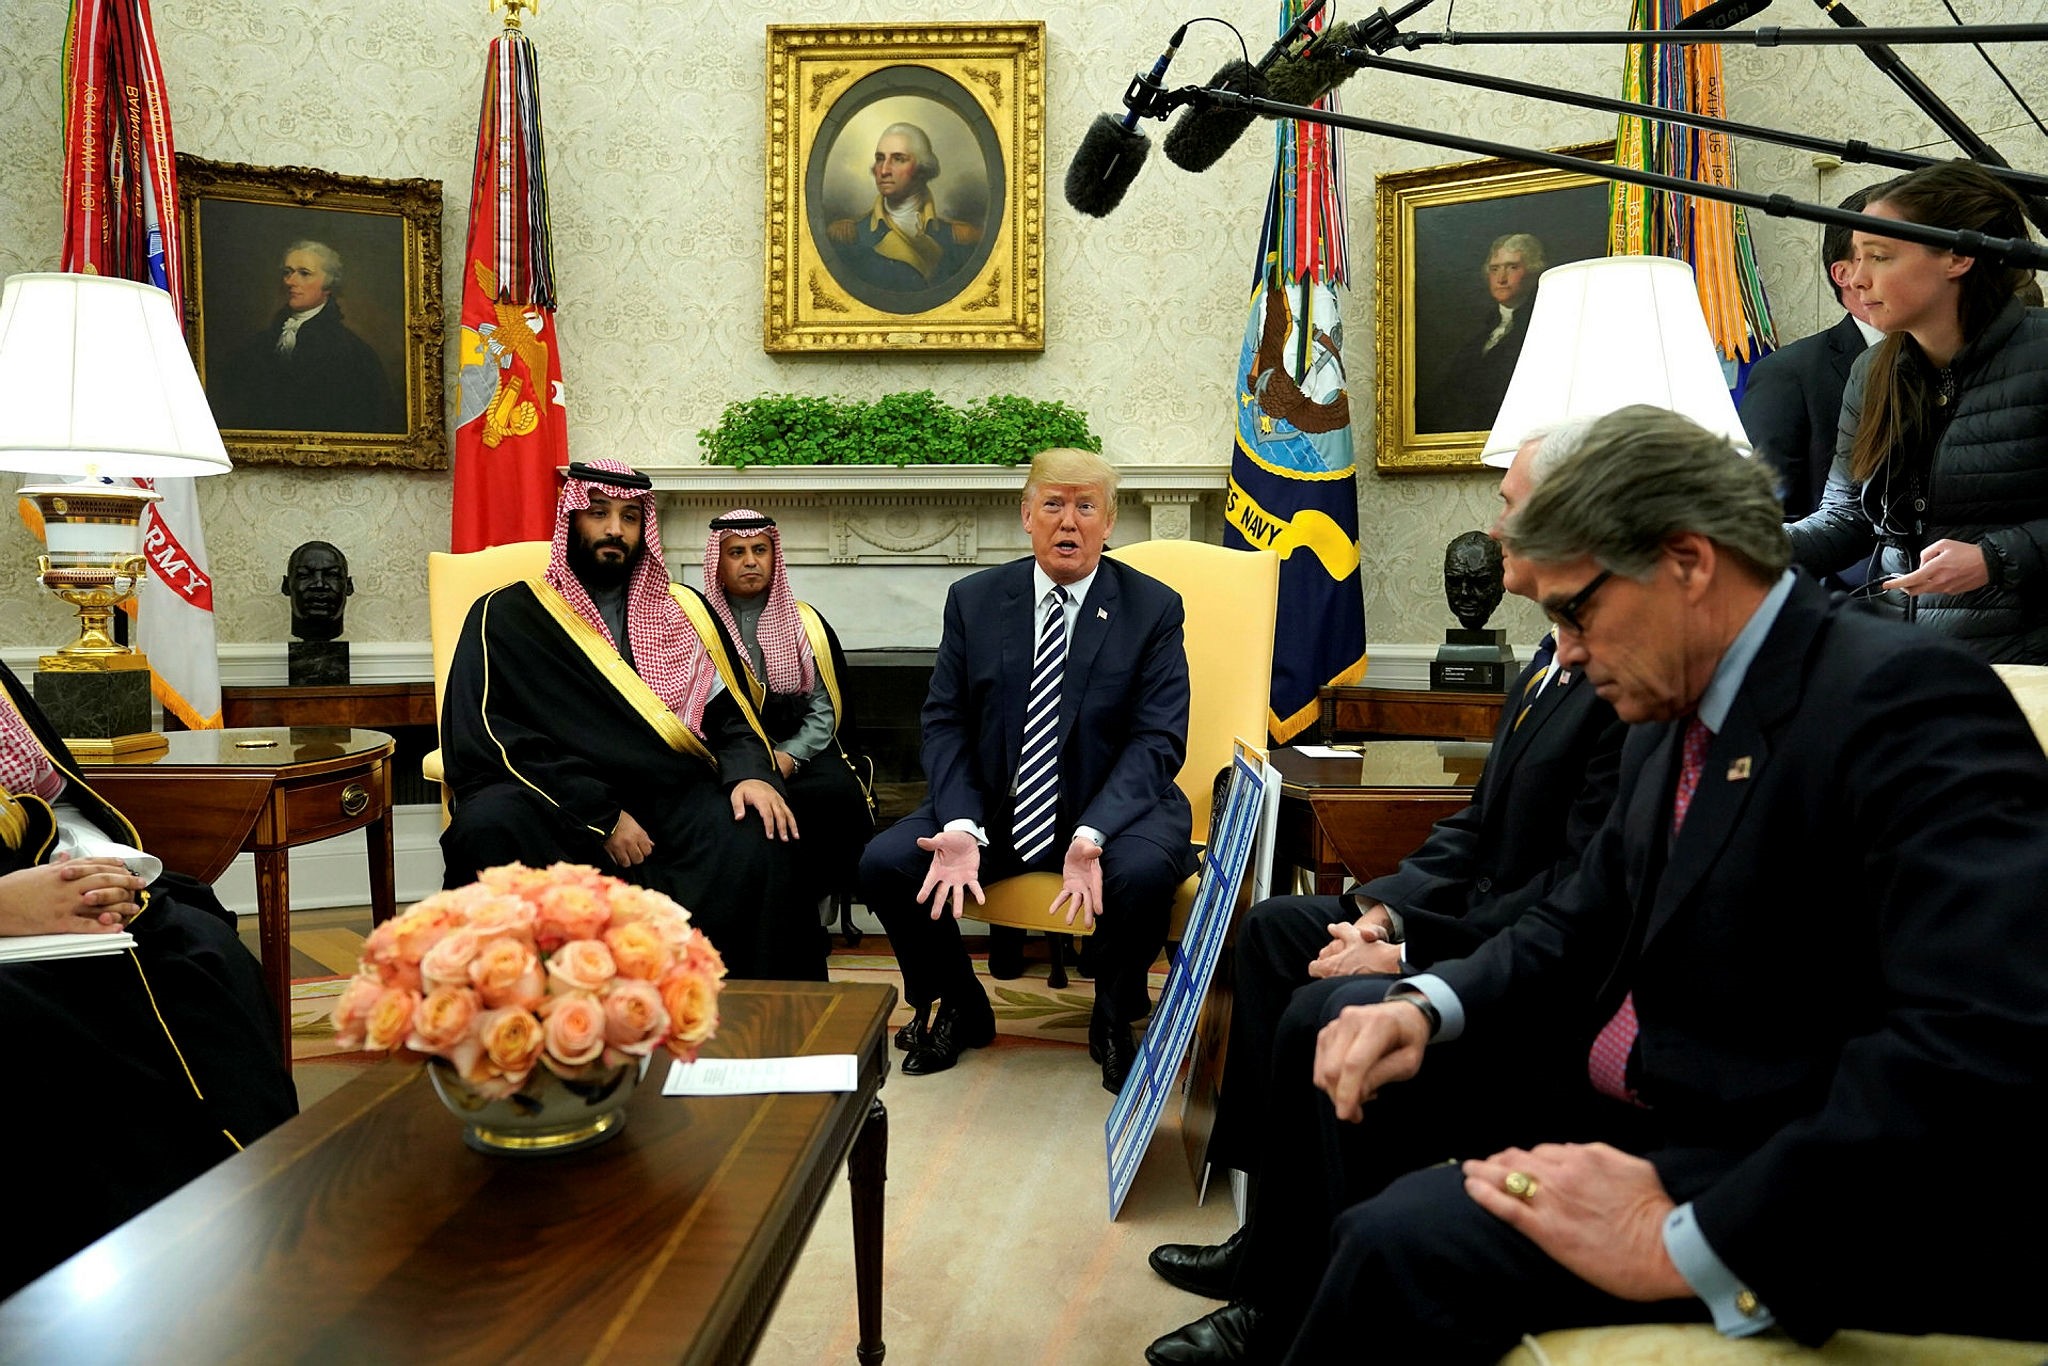 U.S. President Donald Trump with Energy Secretary Rick Perry (R), delivers remarks as he welcomes Saudi Crown Prince Mohammad bin Salman in the Oval Office at the White House, March 20.